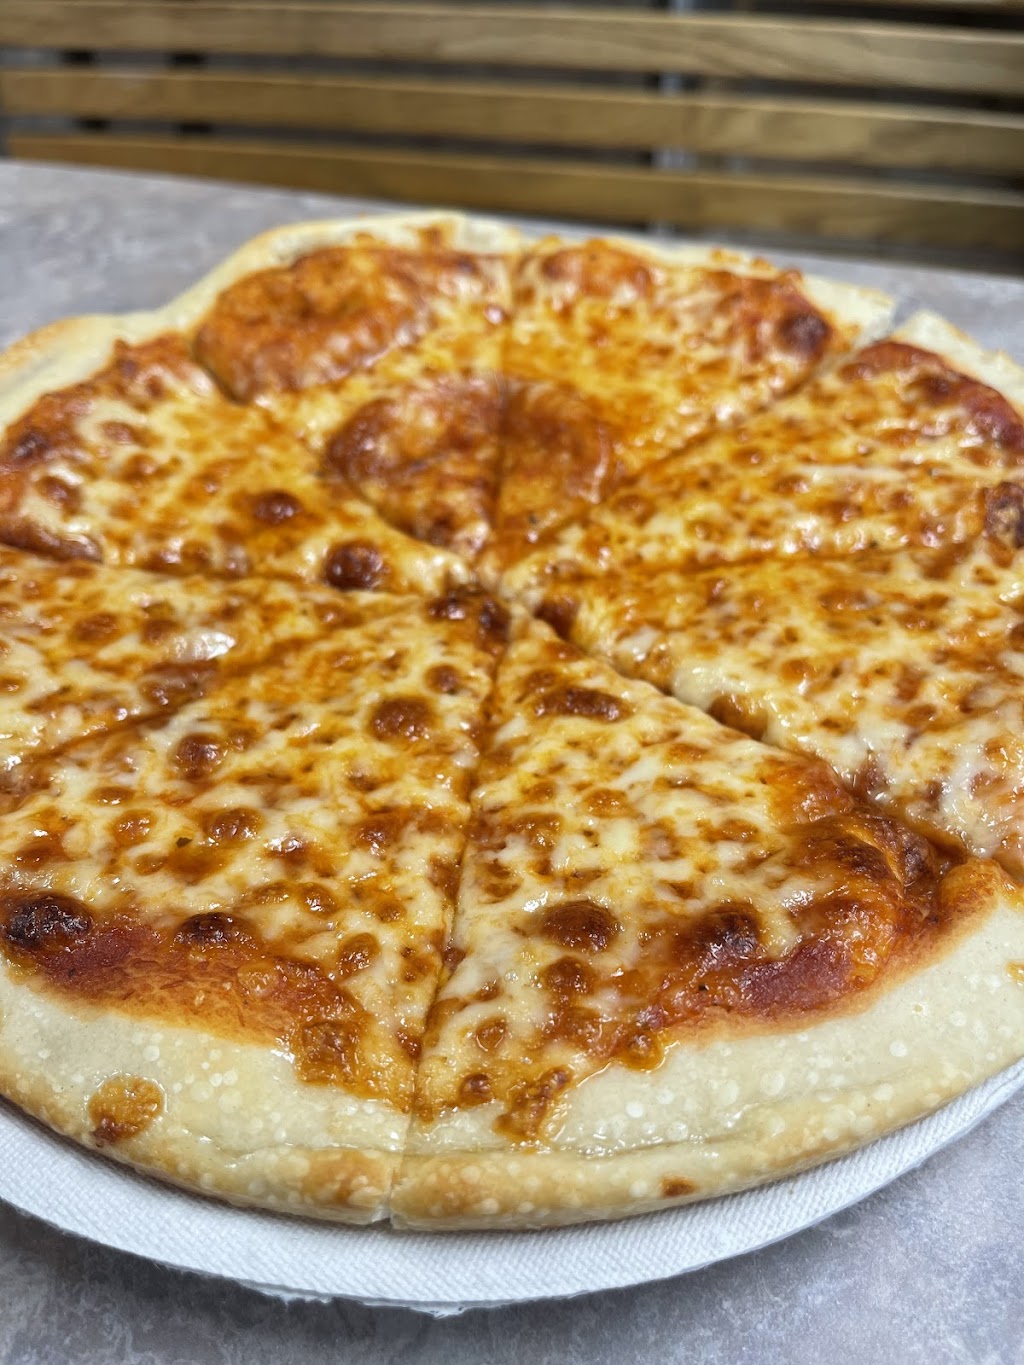 Singas Famous Pizza | 26021 Hillside Avenue, Queens, NY 11004 | Phone: (718) 347-4300